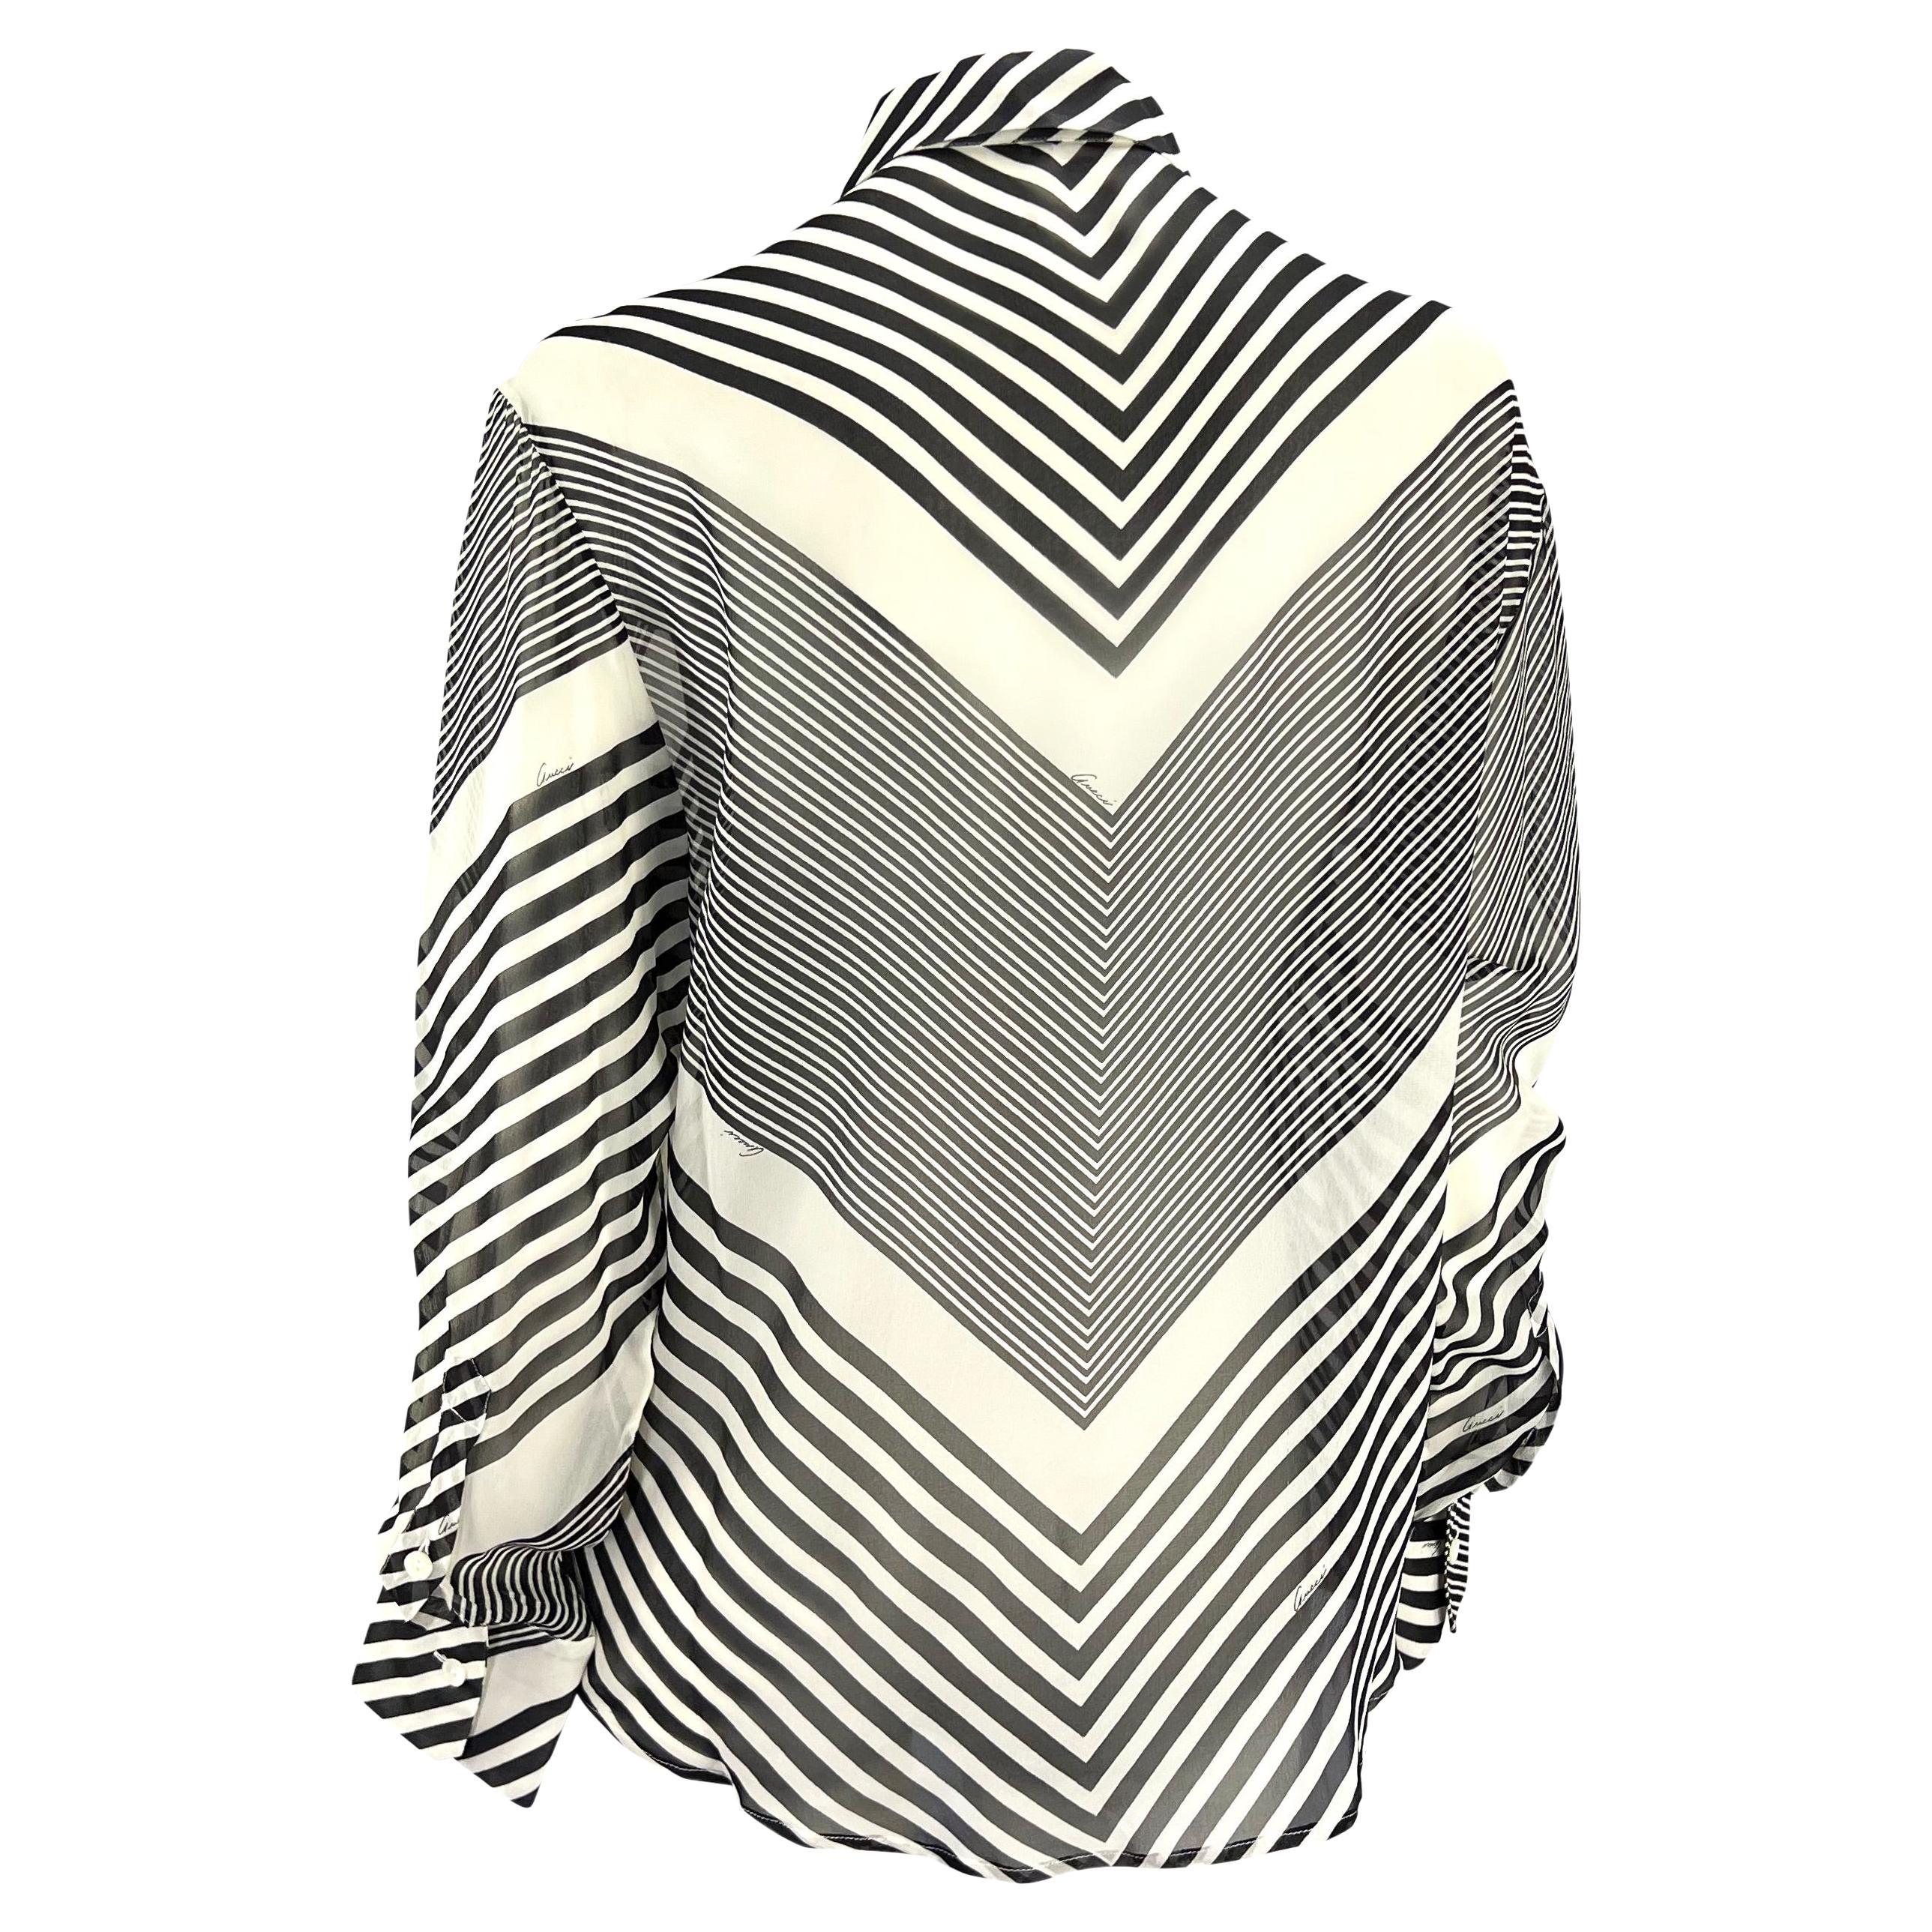 Cruise 2000 Gucci by Tom Ford Black White Stripe Sheer Button Up Top For Sale 2